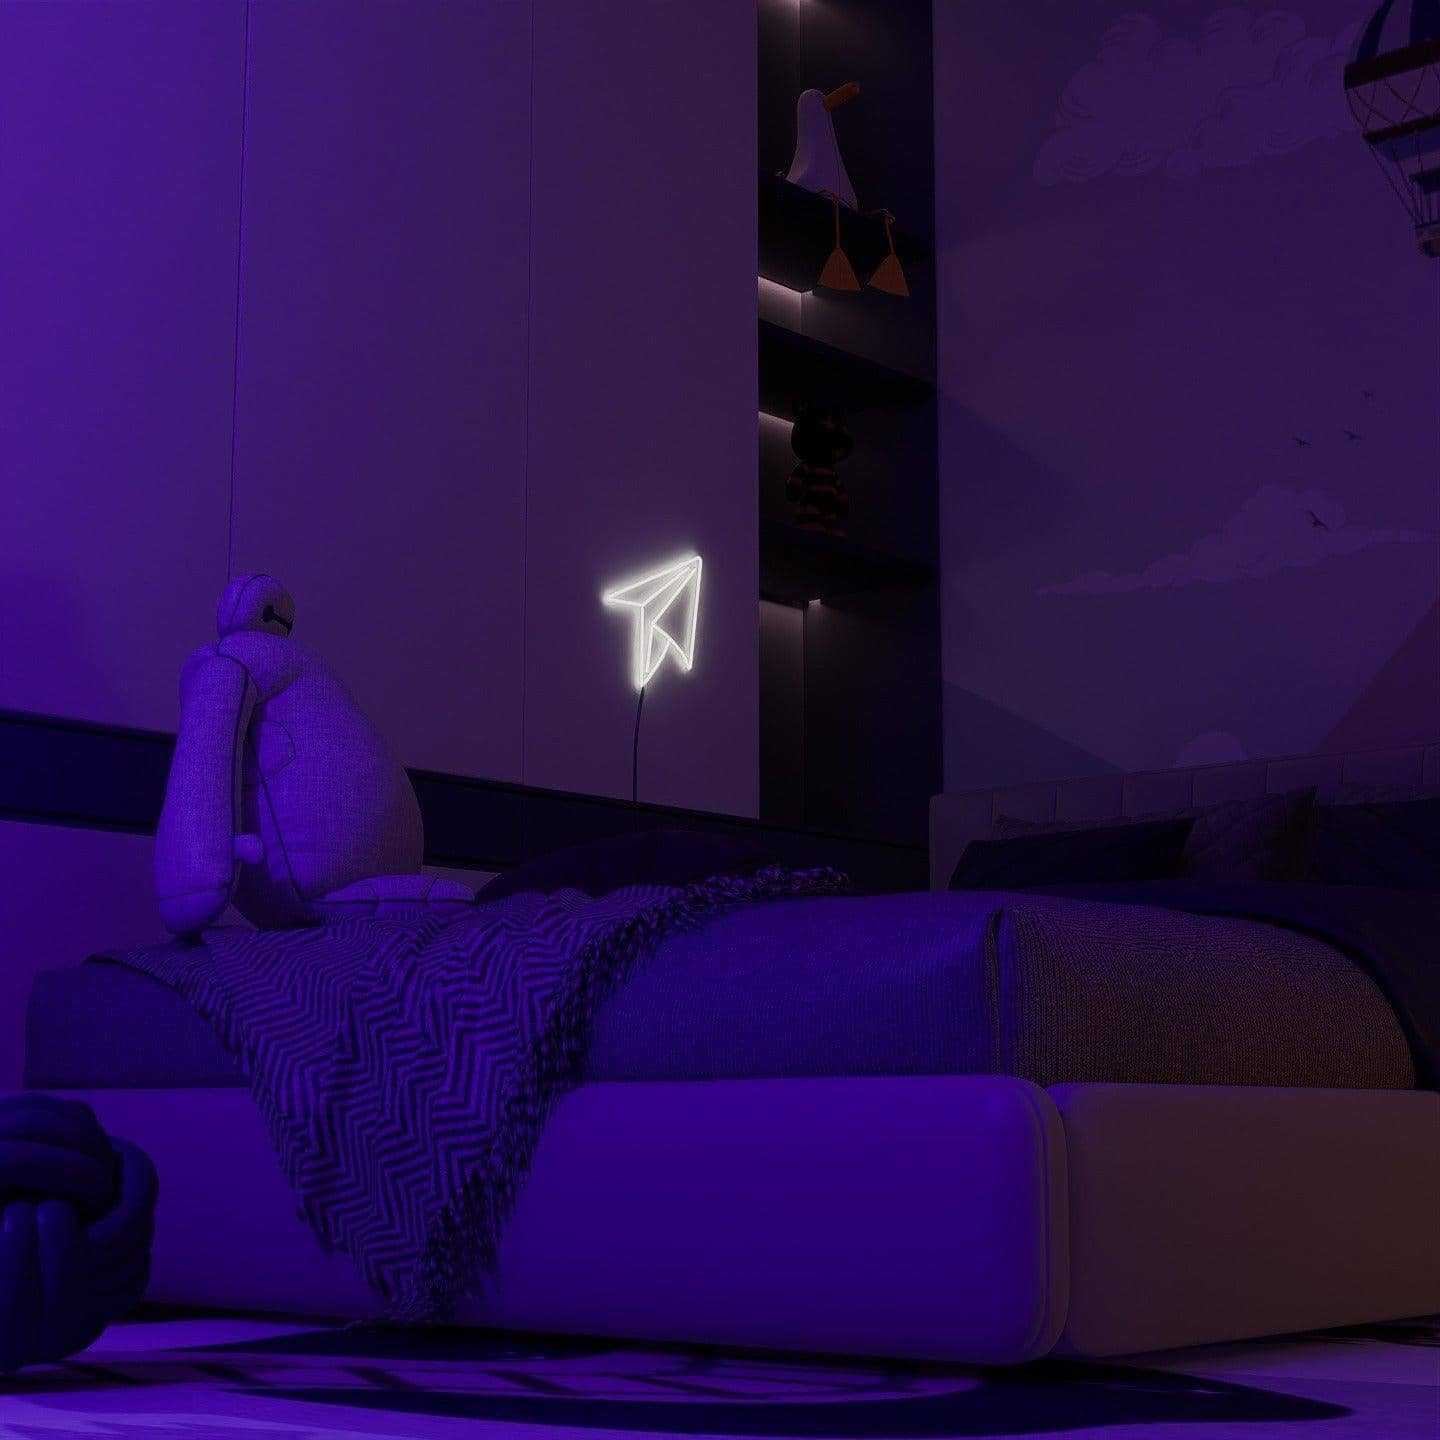 light-up-neon-lights-and-hang-them-in-your-bedroom-for-display-paperplane